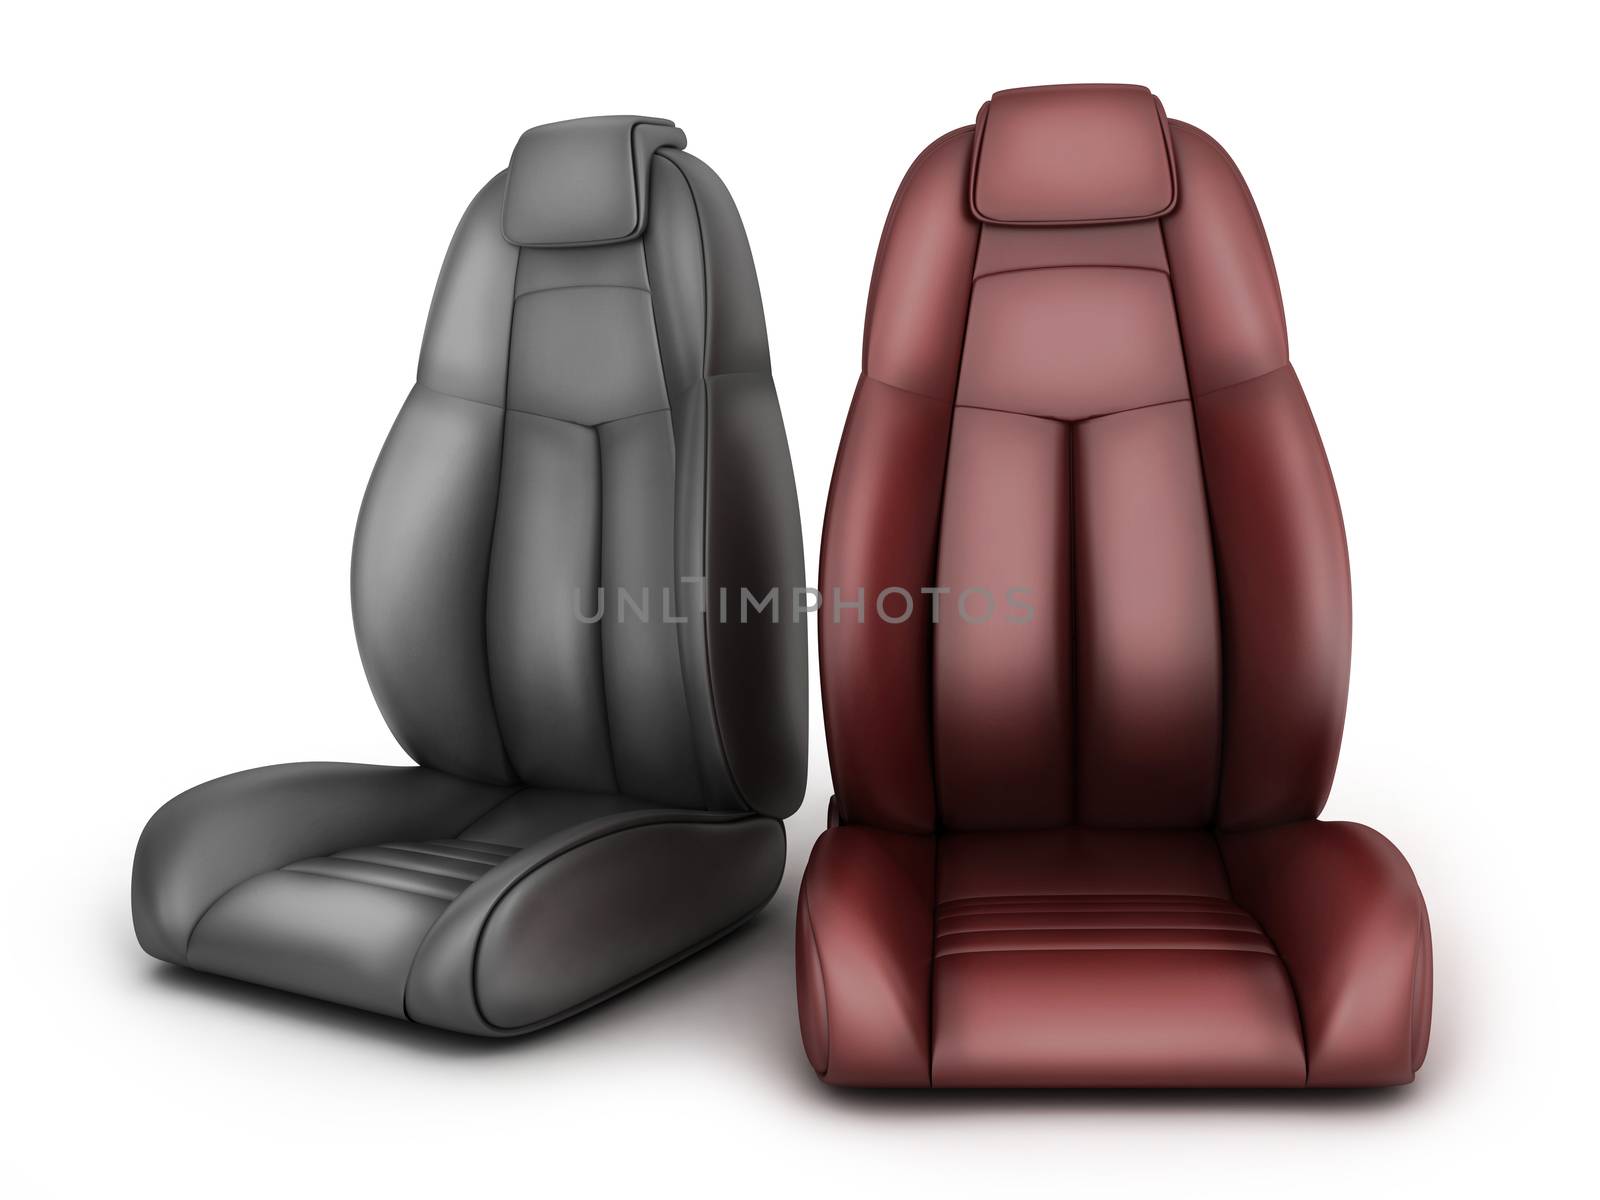 Two drive seat car. 3d illustration